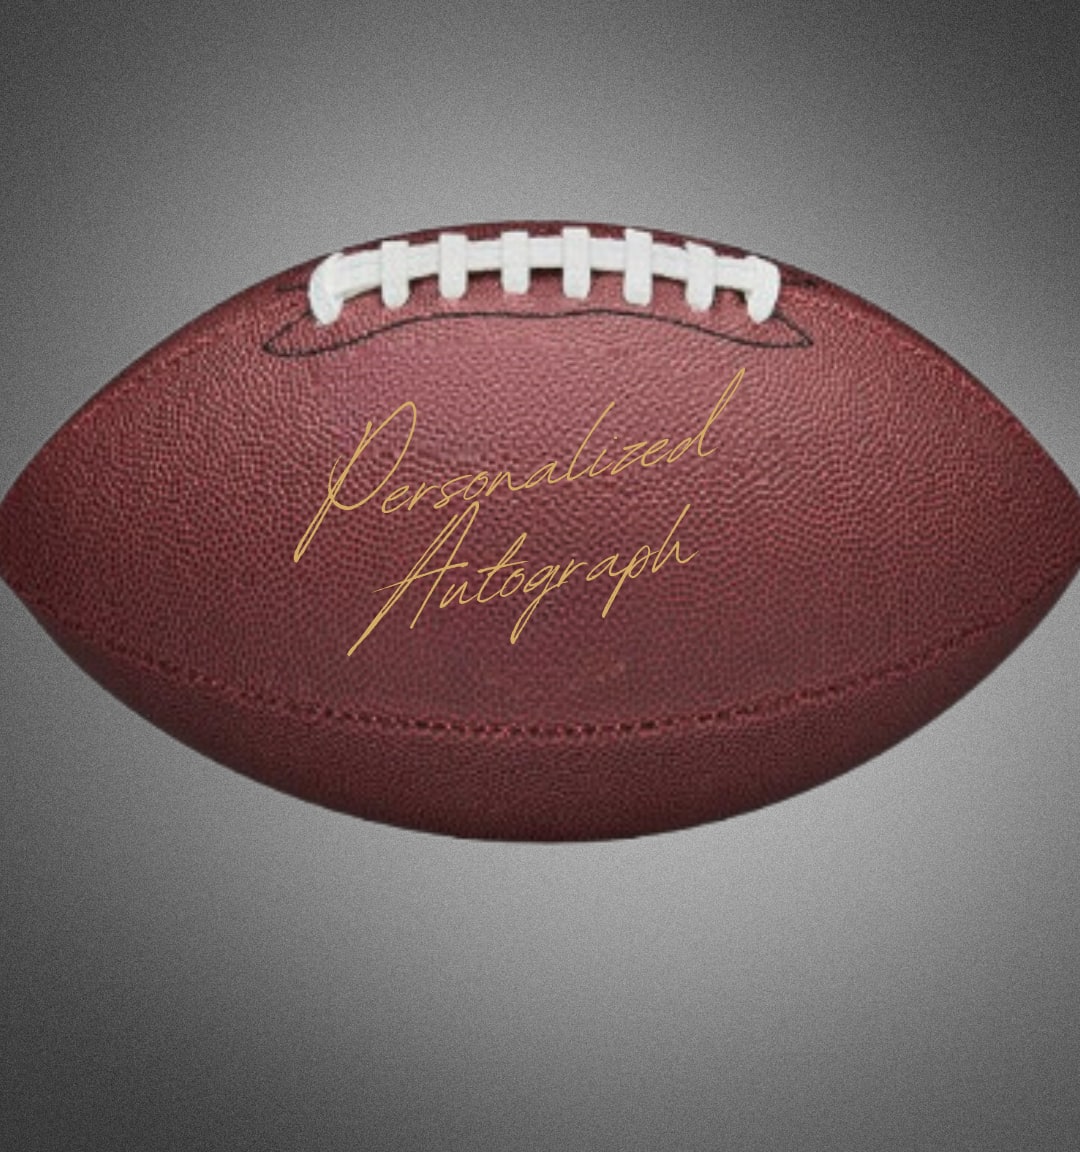 Limited Edition Brian Mitchell Autographed Football